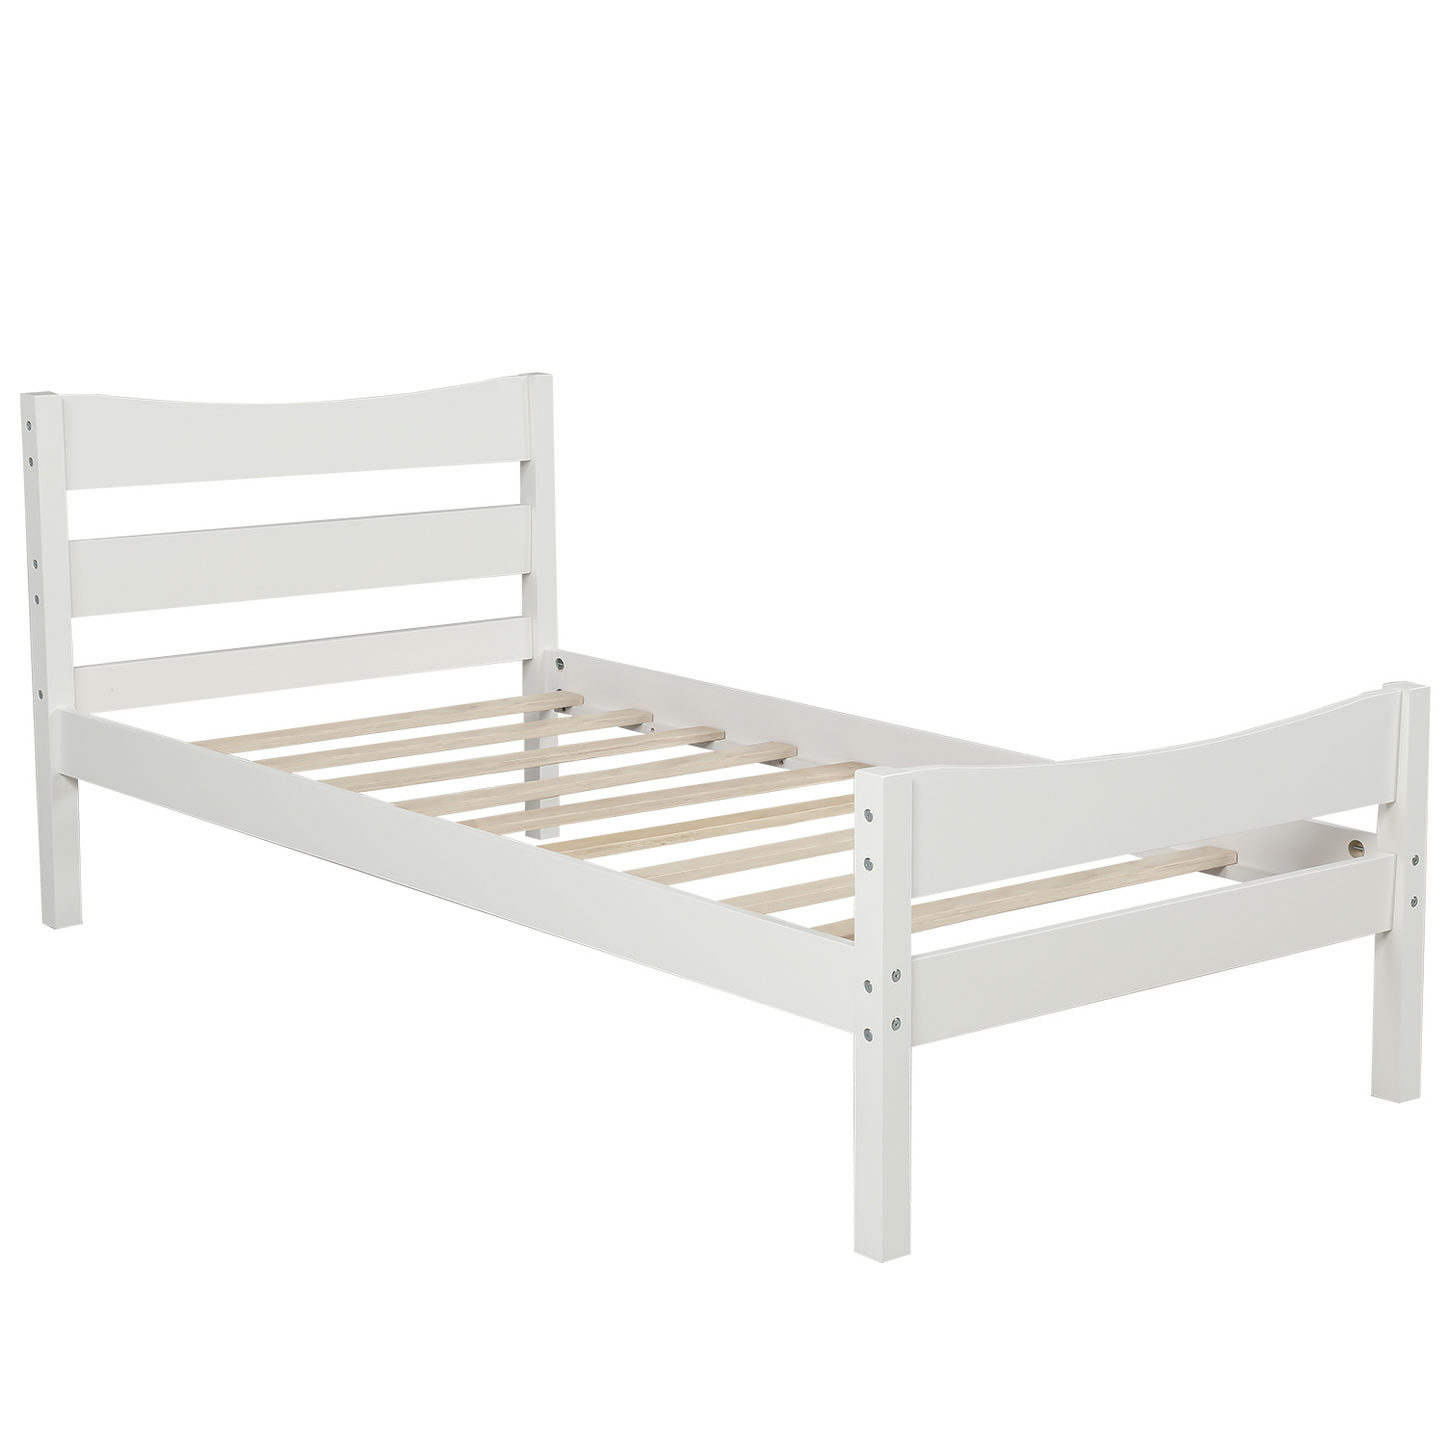 【Not allowed to sell to Walmart】Twin Size Wood Platform Bed with Headboard and Wooden Slat Support (White)